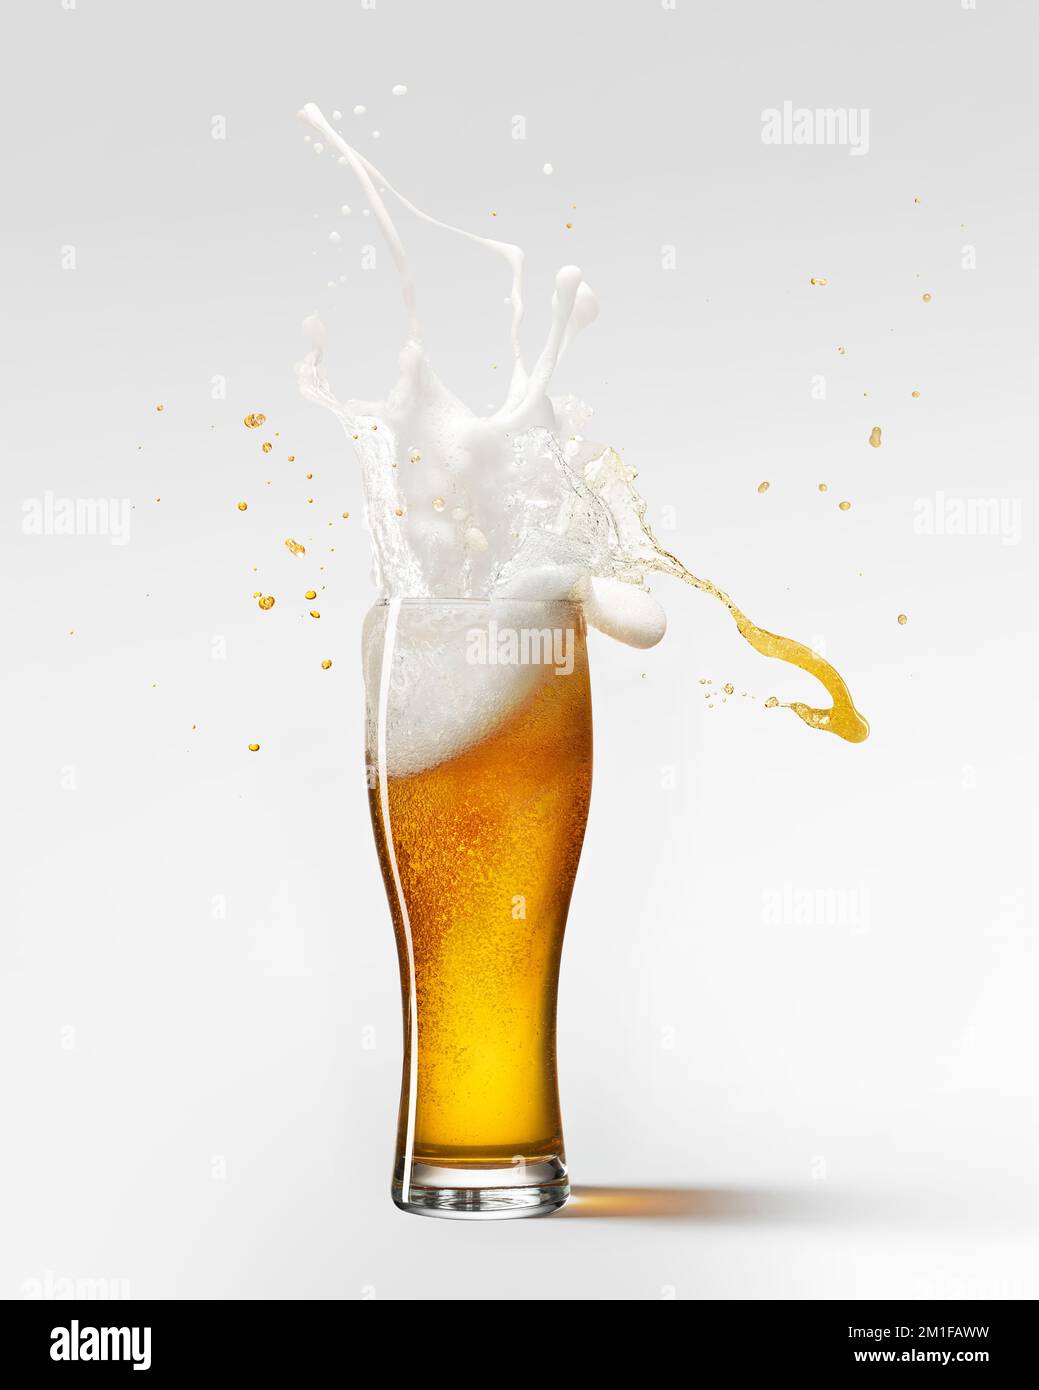 Foam splashes. Glass of delicious lager beer isolated over grey background. Beer drops. Concept of alcohol, oktoberfest, drinks Stock Photo